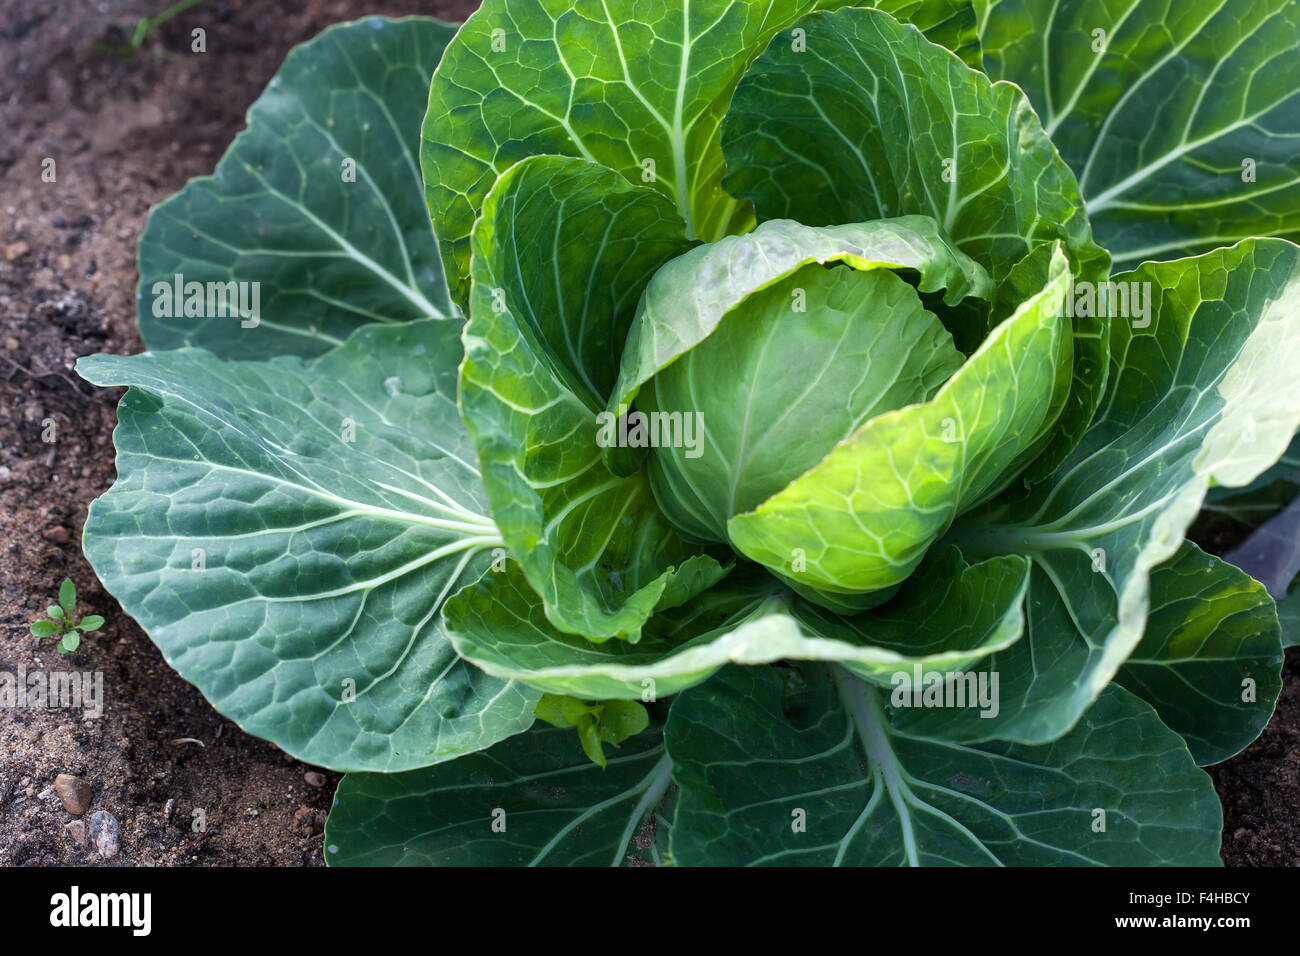 White head cabbage on the field ready to harvest Stock Photo